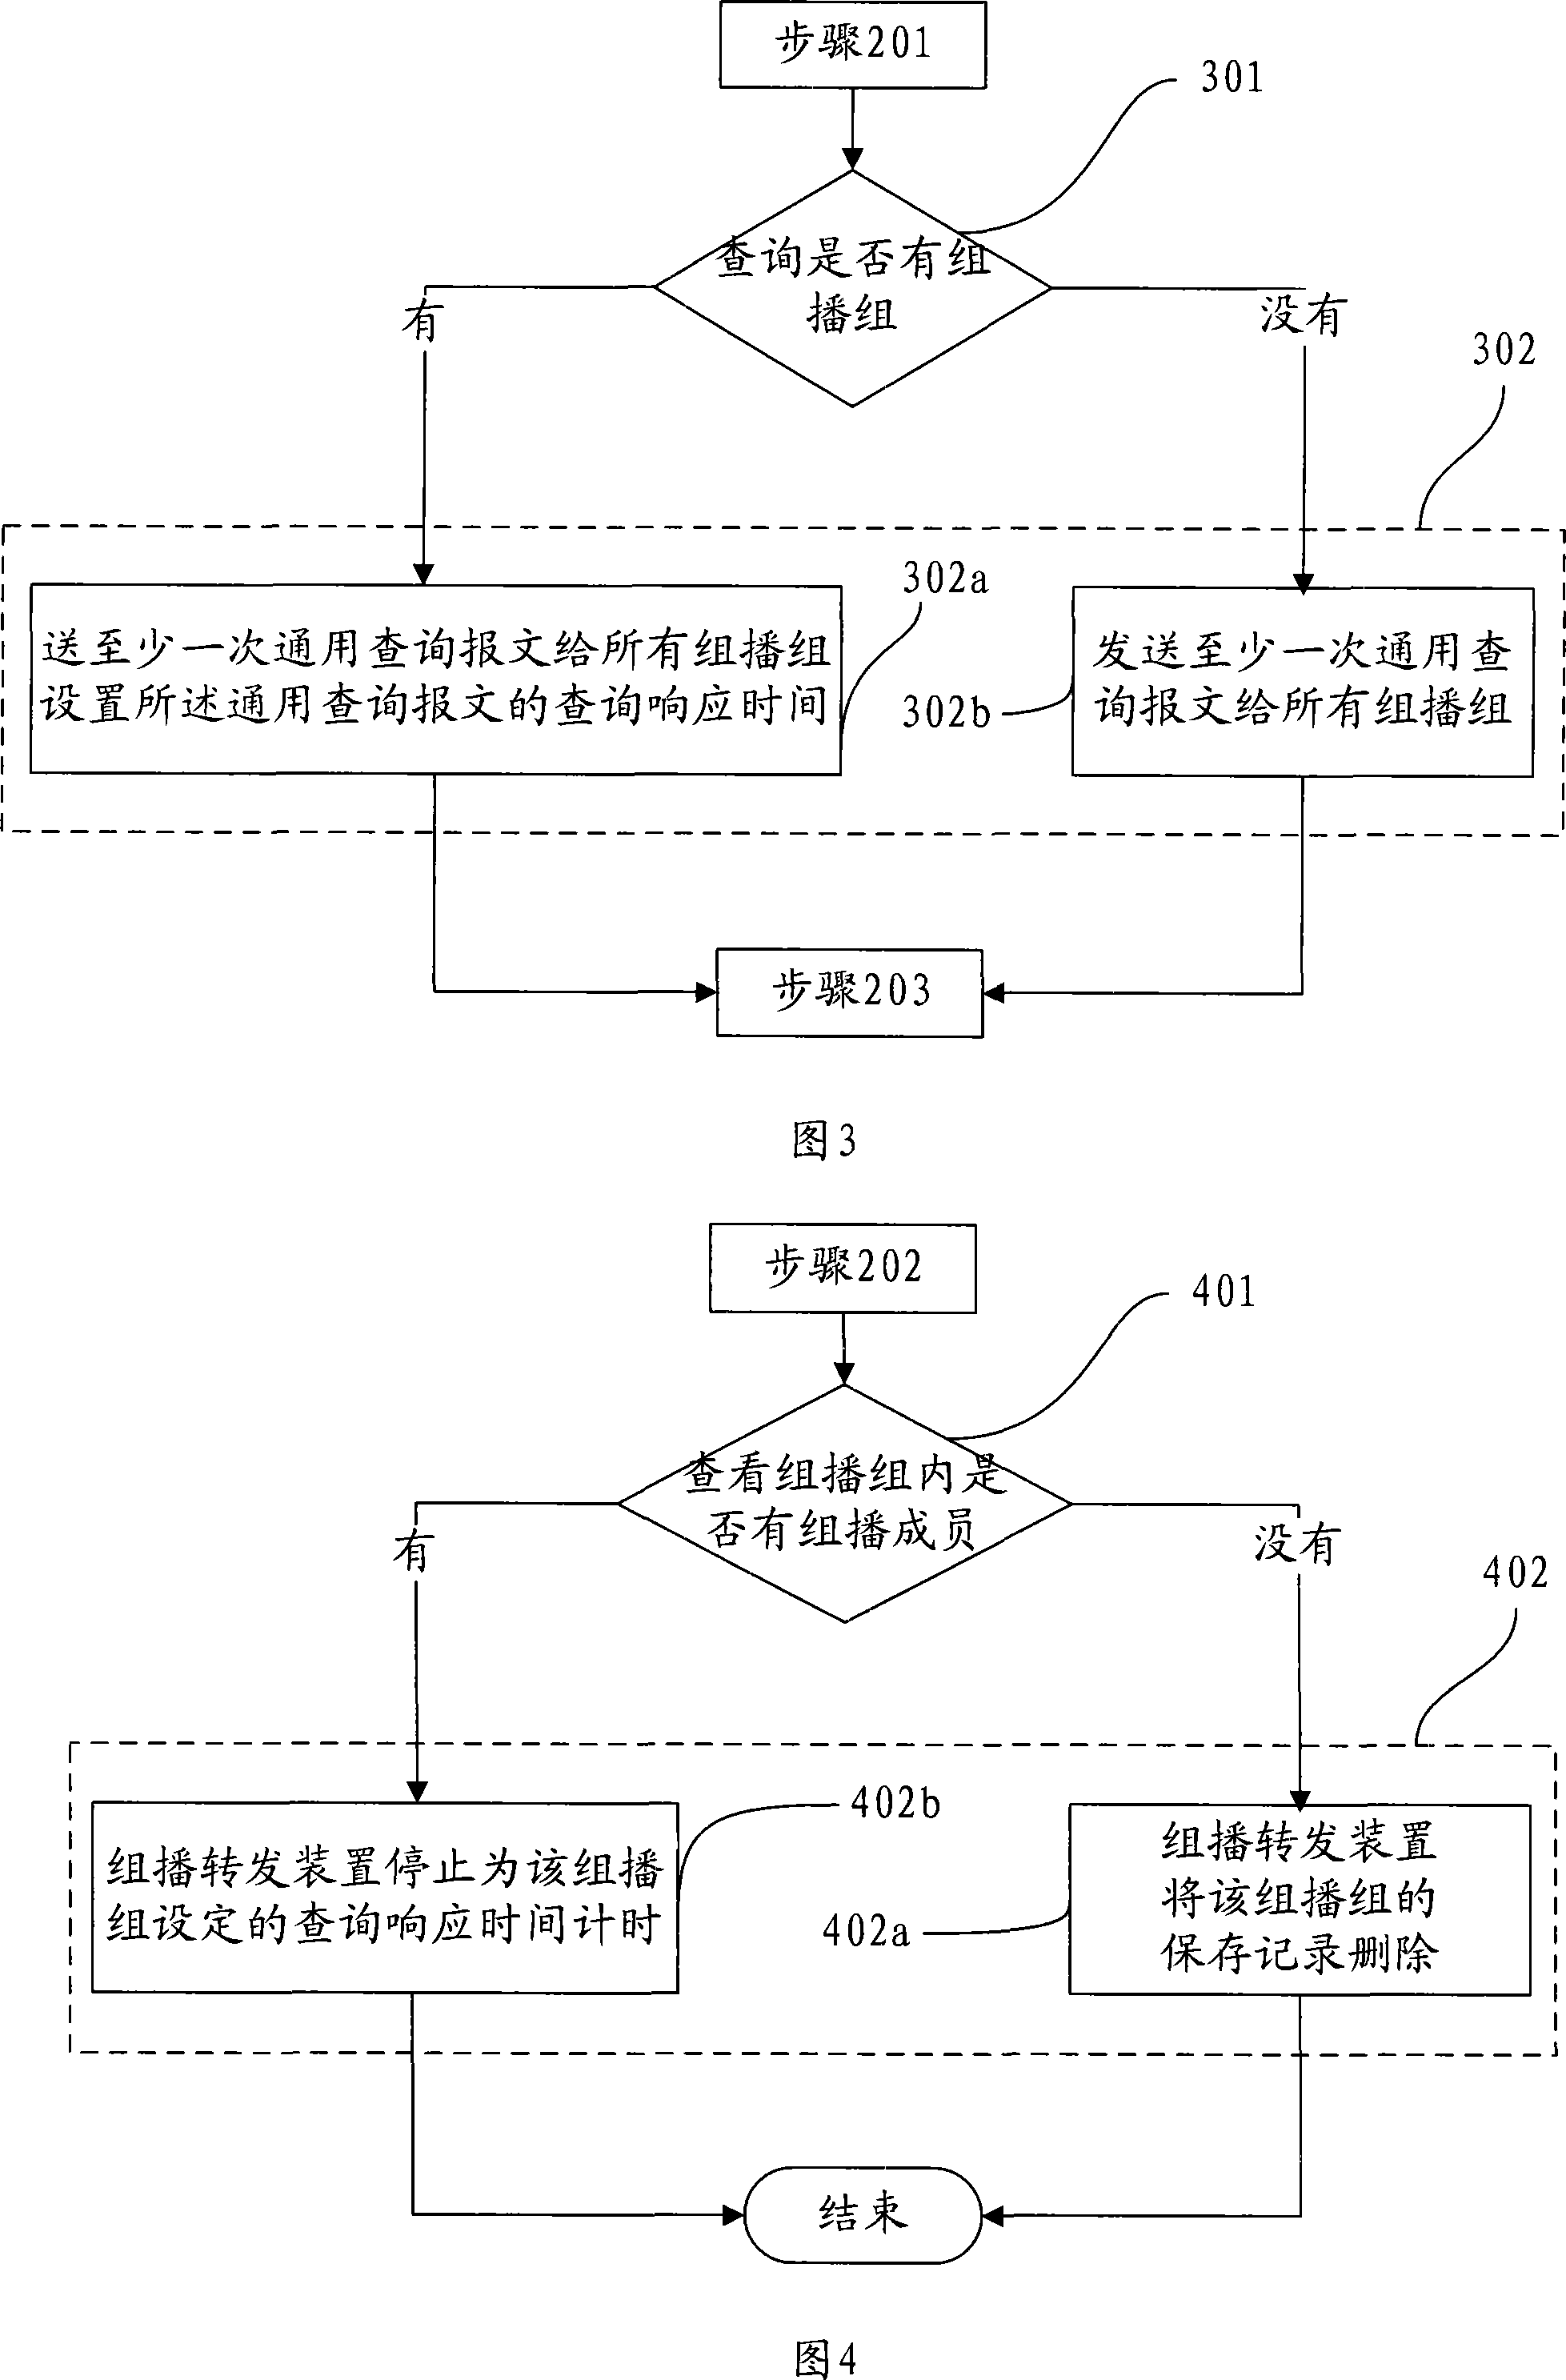 Method and system for converging multicast network and multicast forwarding device